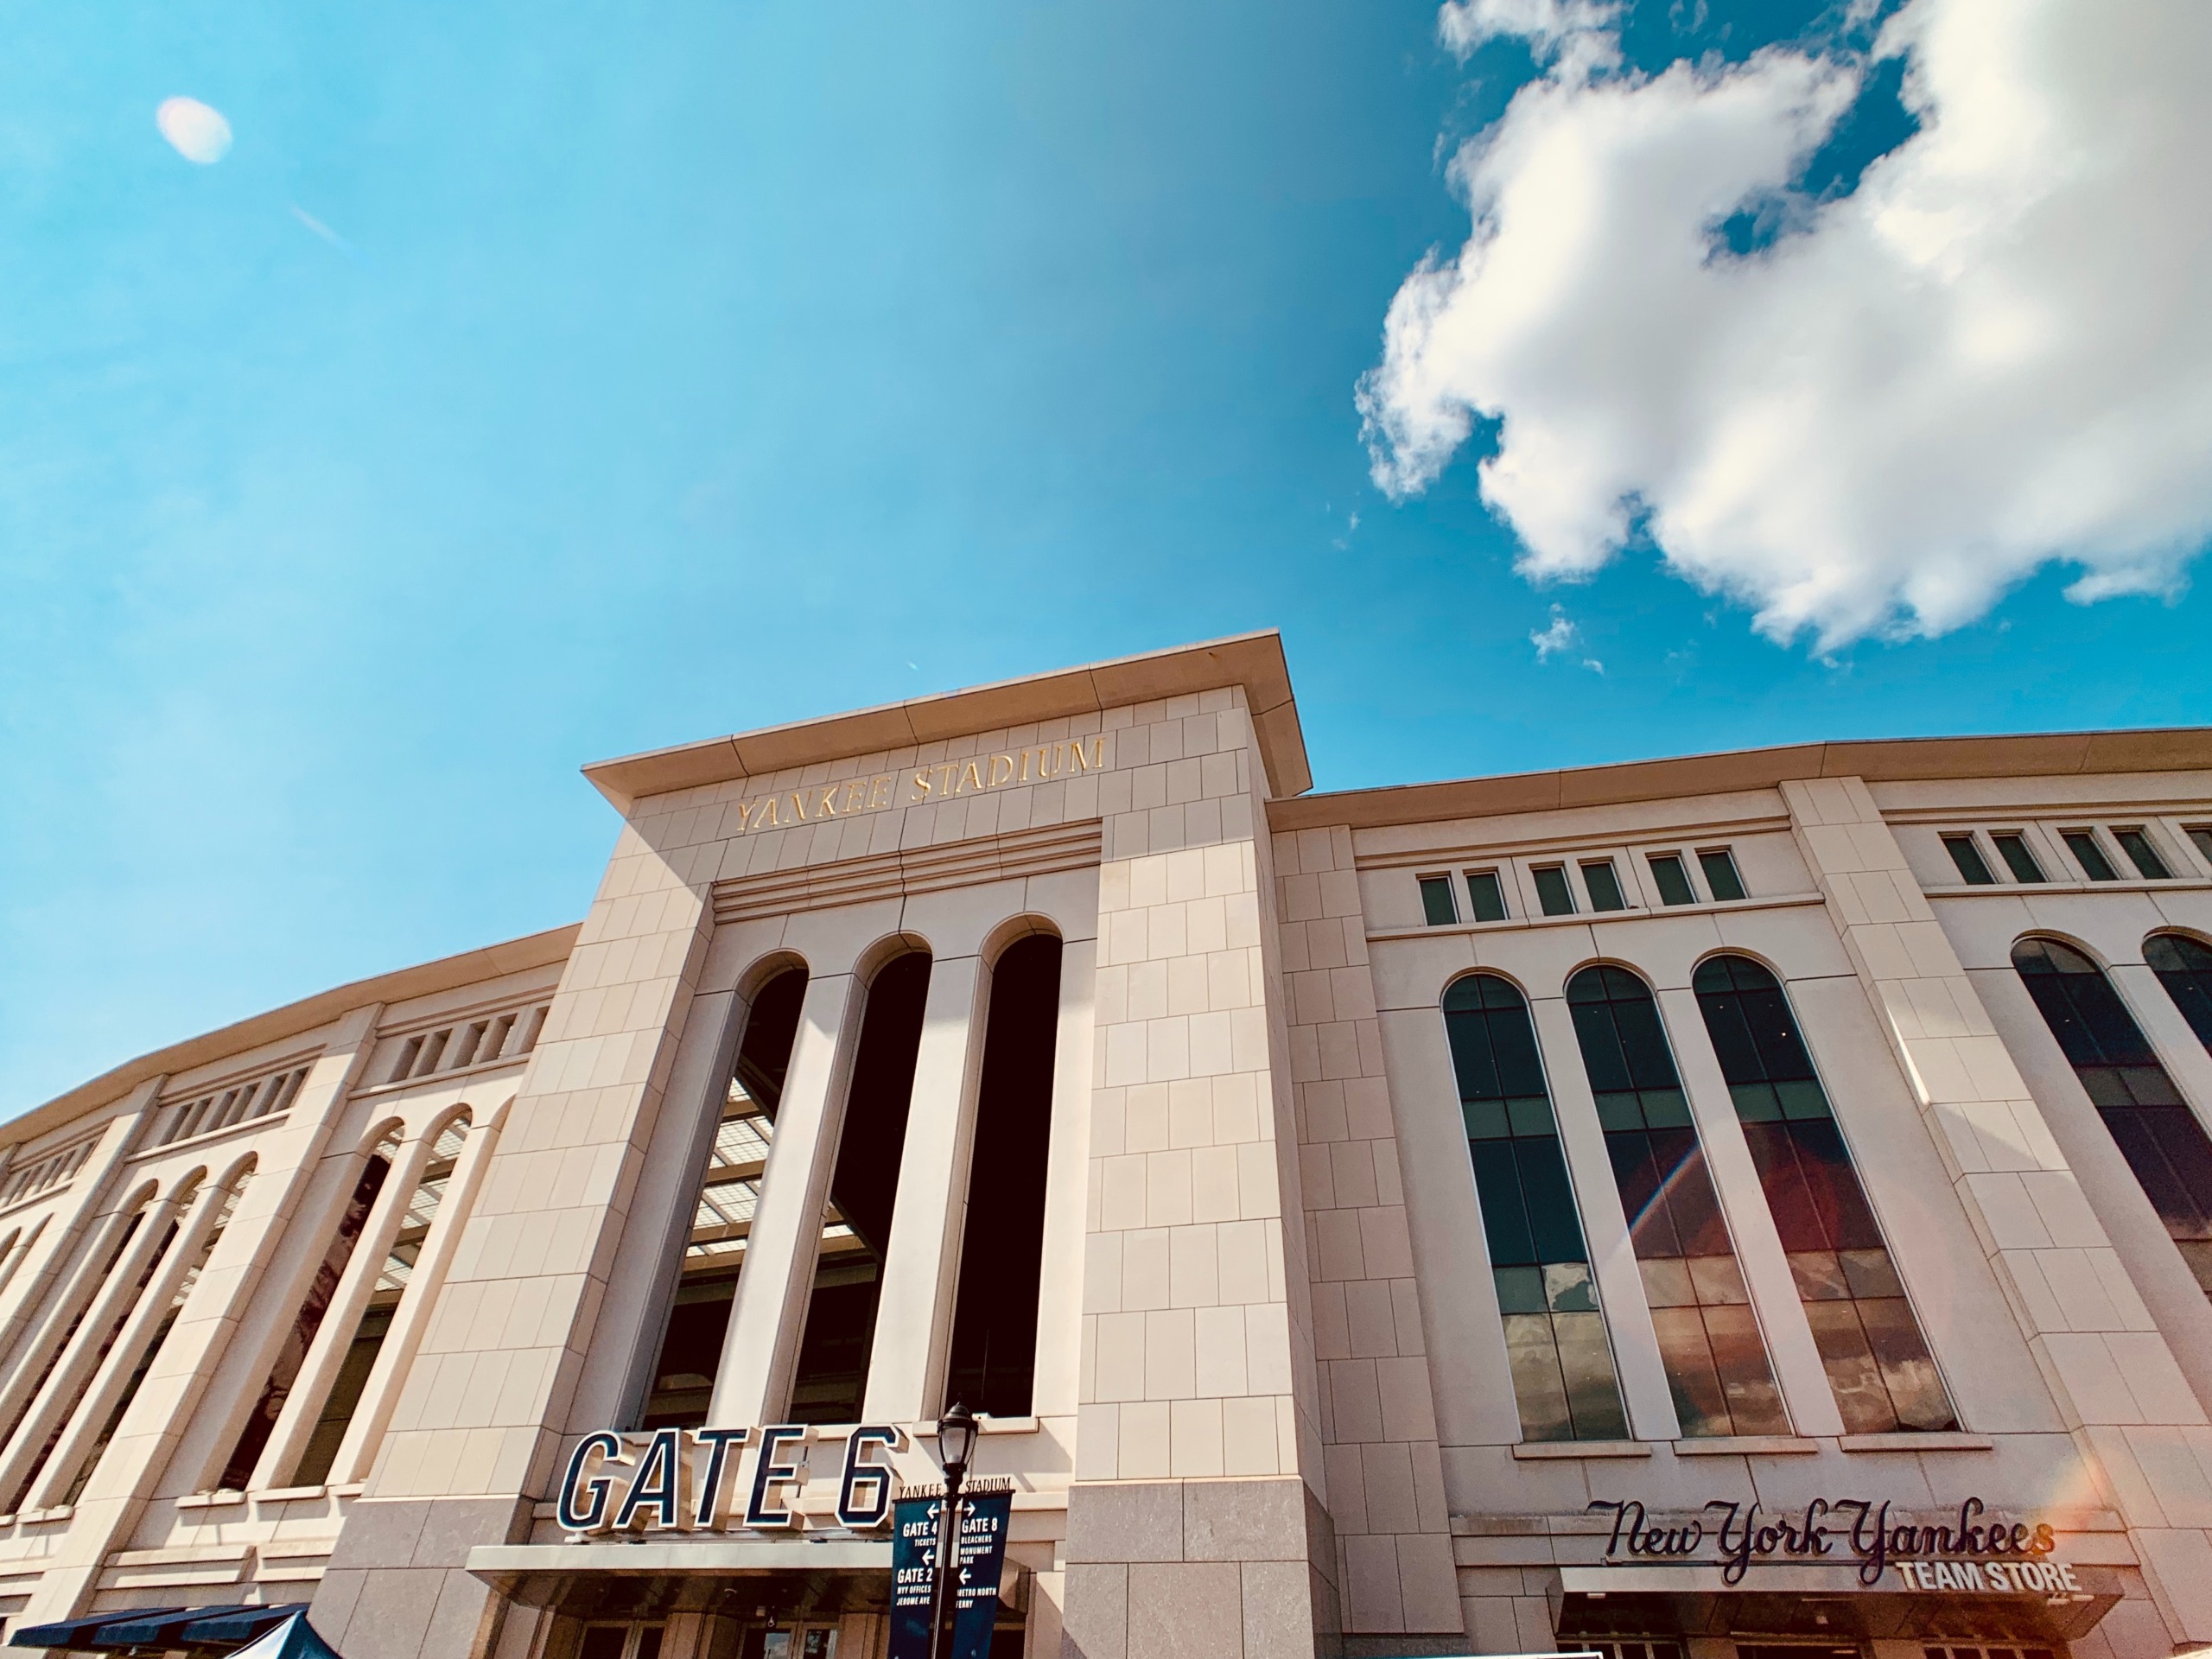 Yankee Stadium parking tips to save your time and money